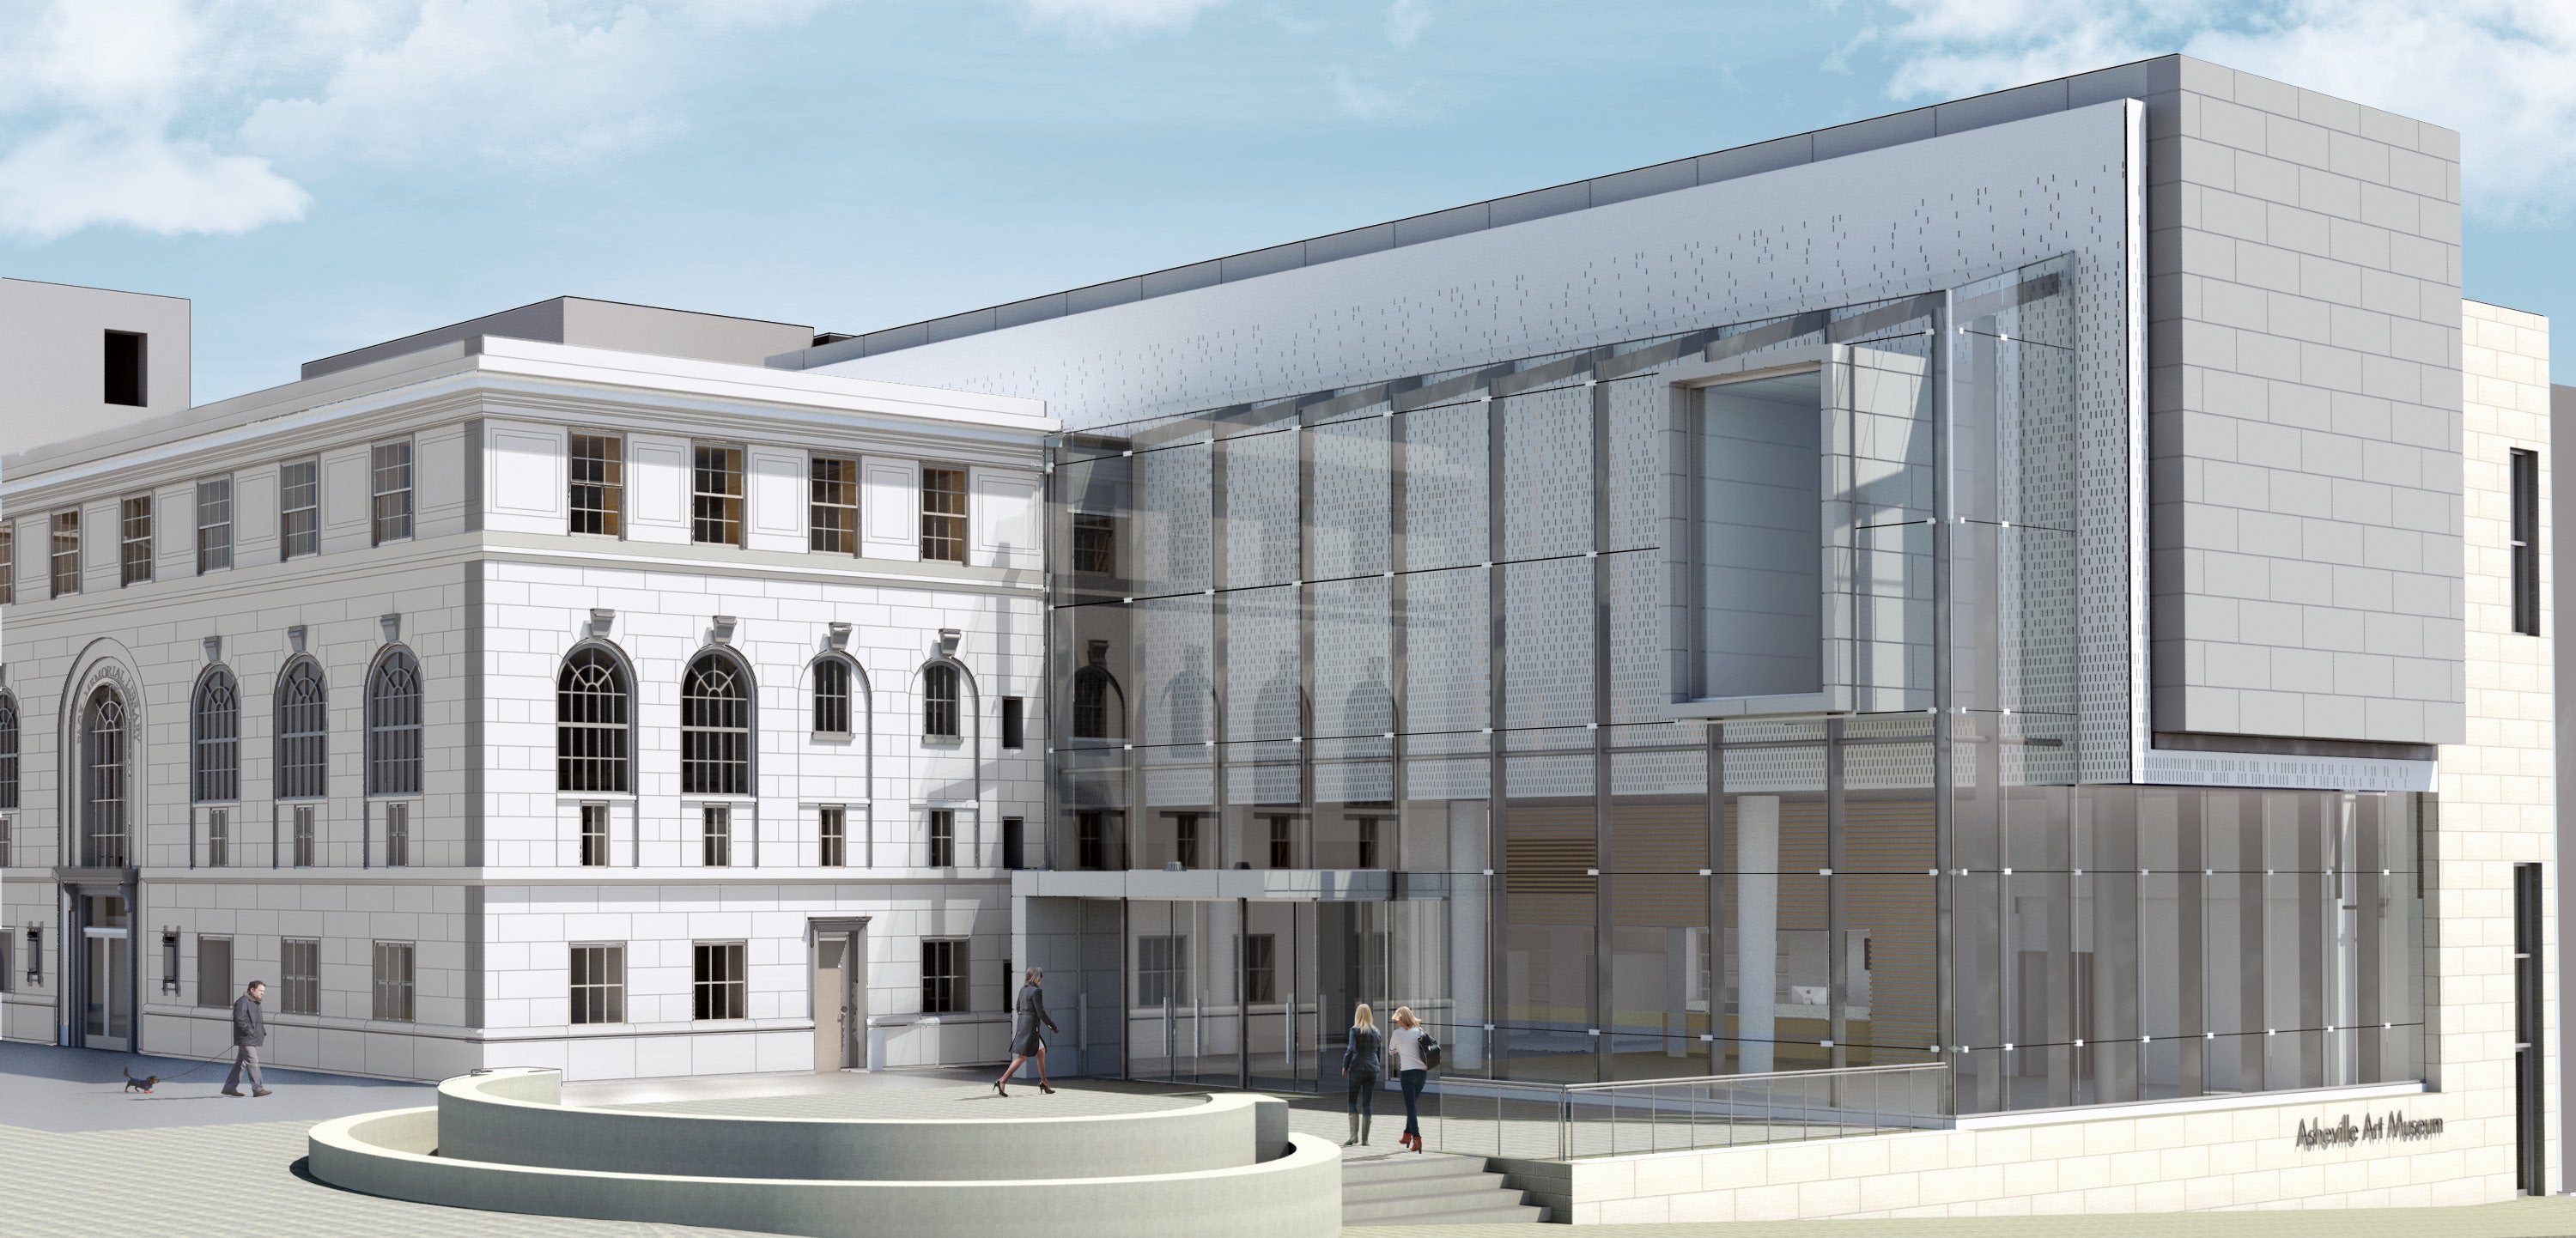 Digital composite of an older museum building with a modern addition.